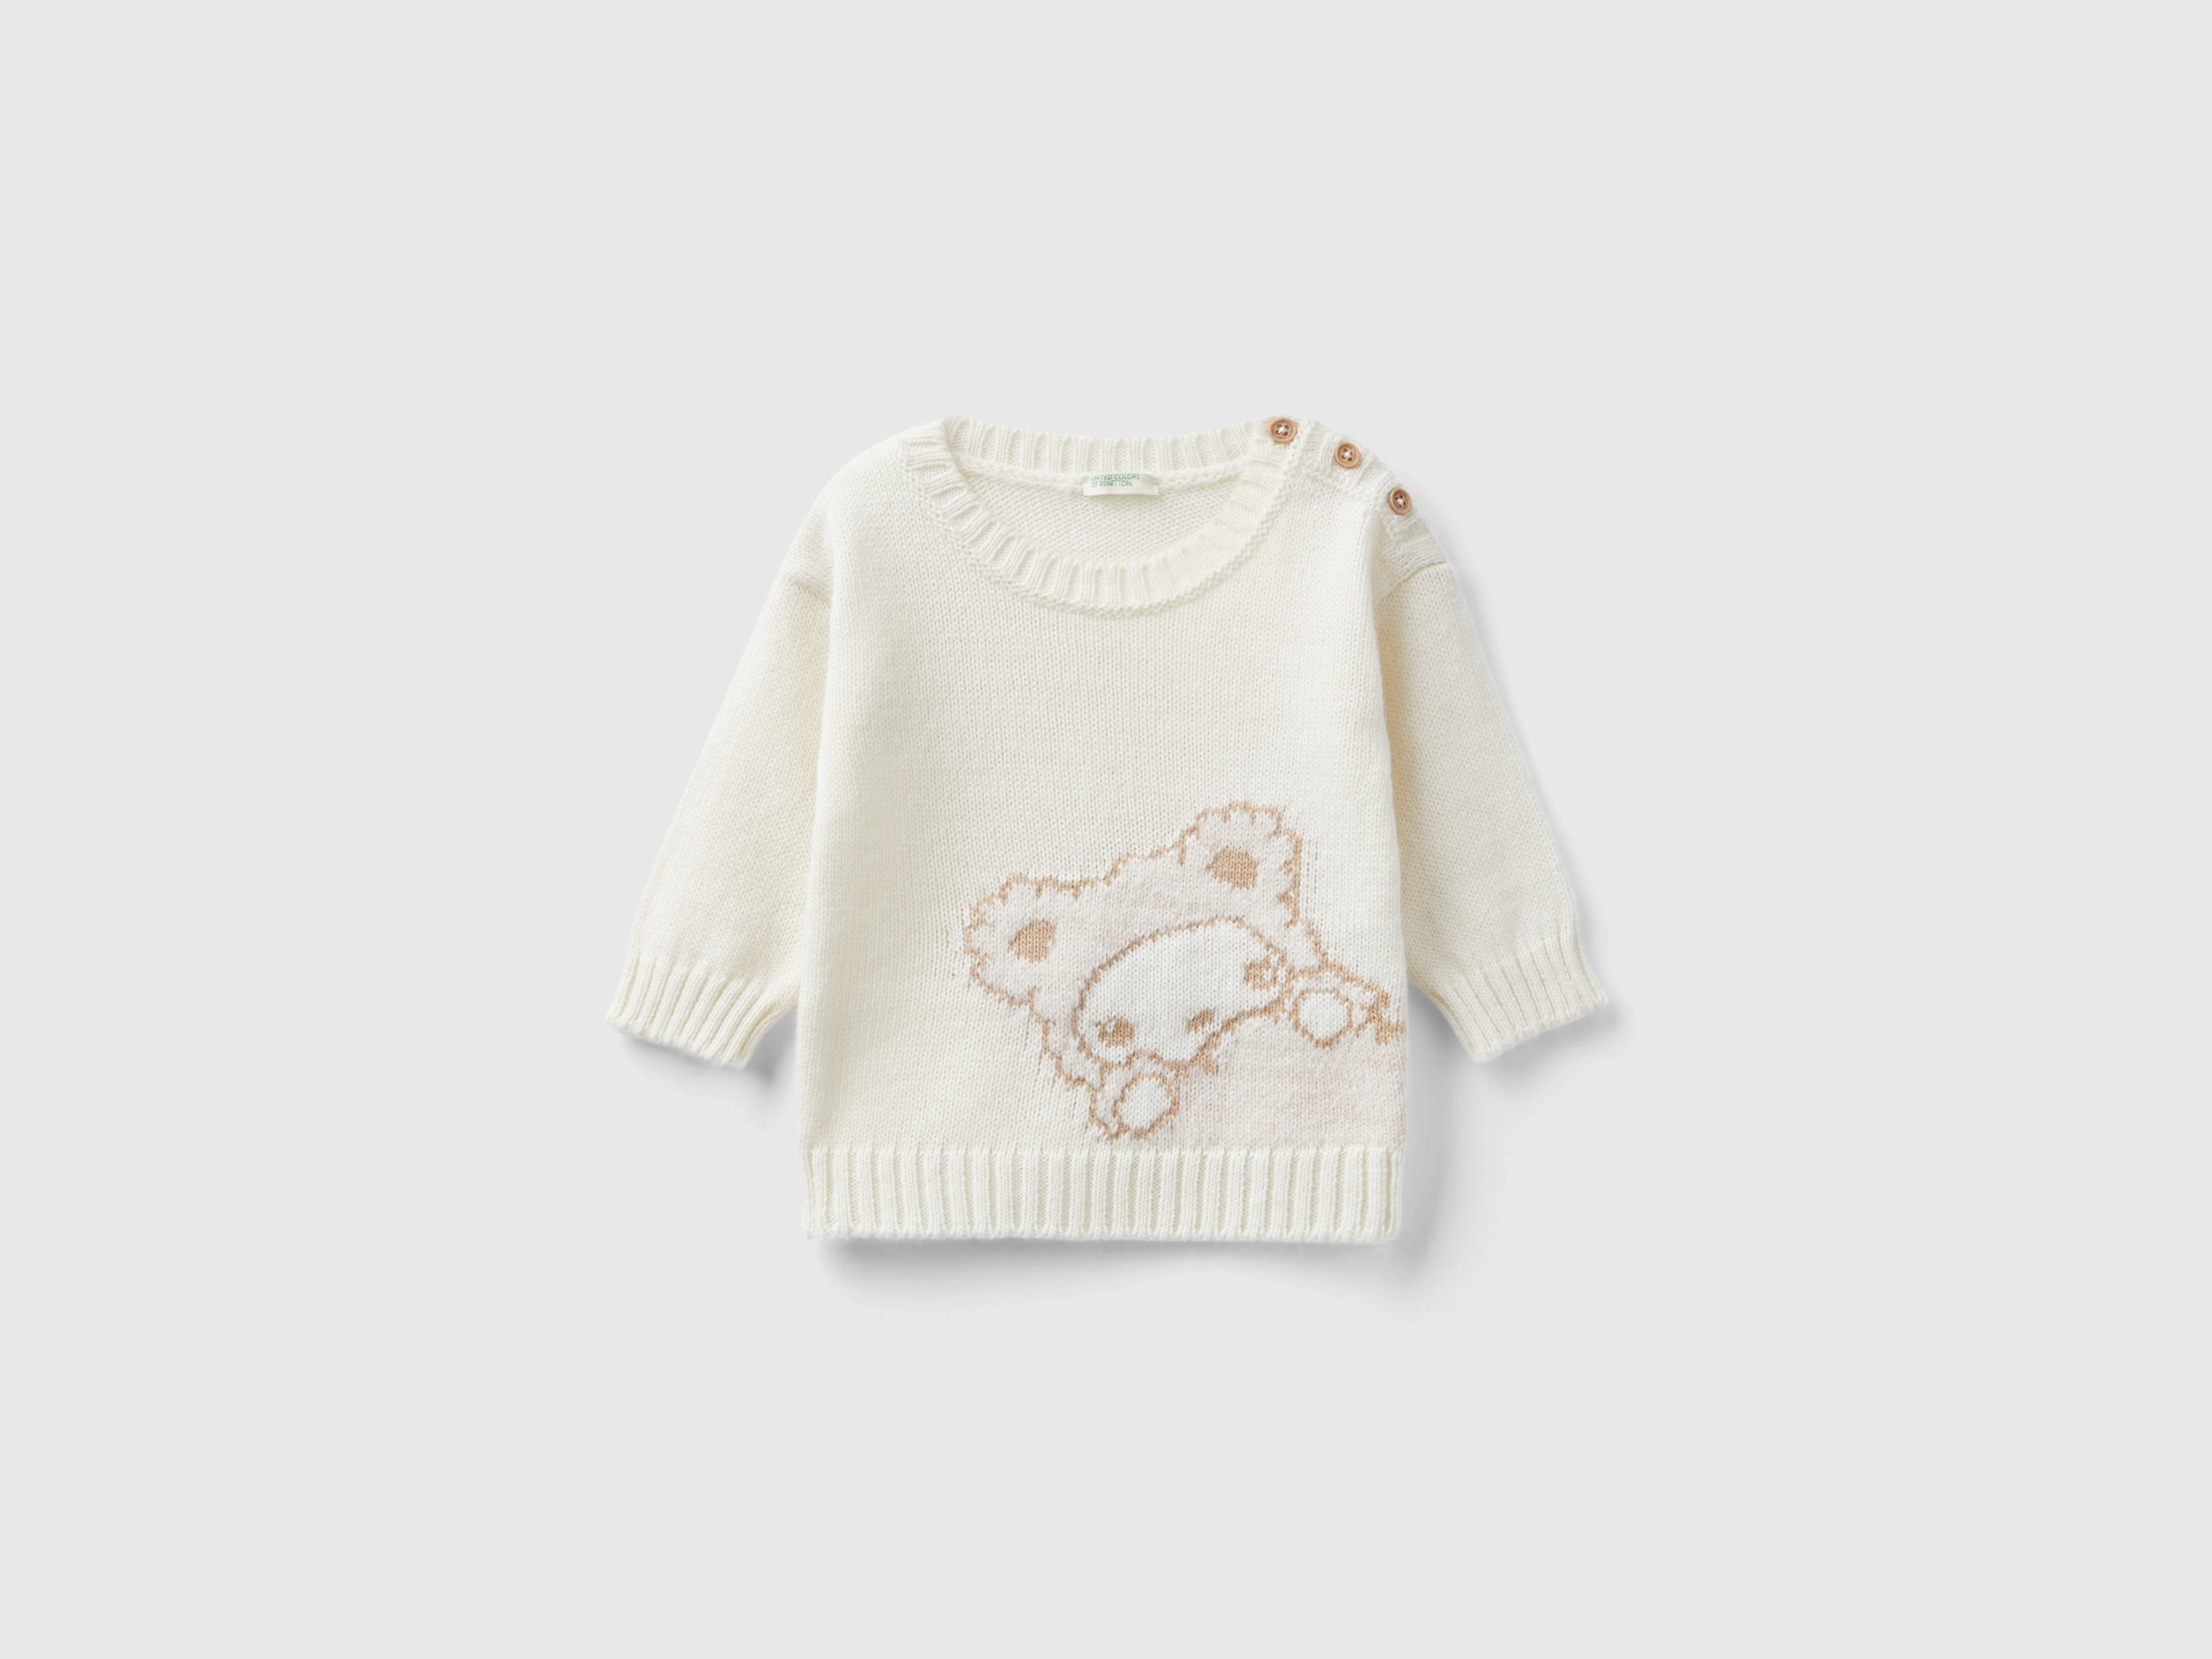 Benetton, Sweater With Inlay, size 12-18, Creamy White, Kids